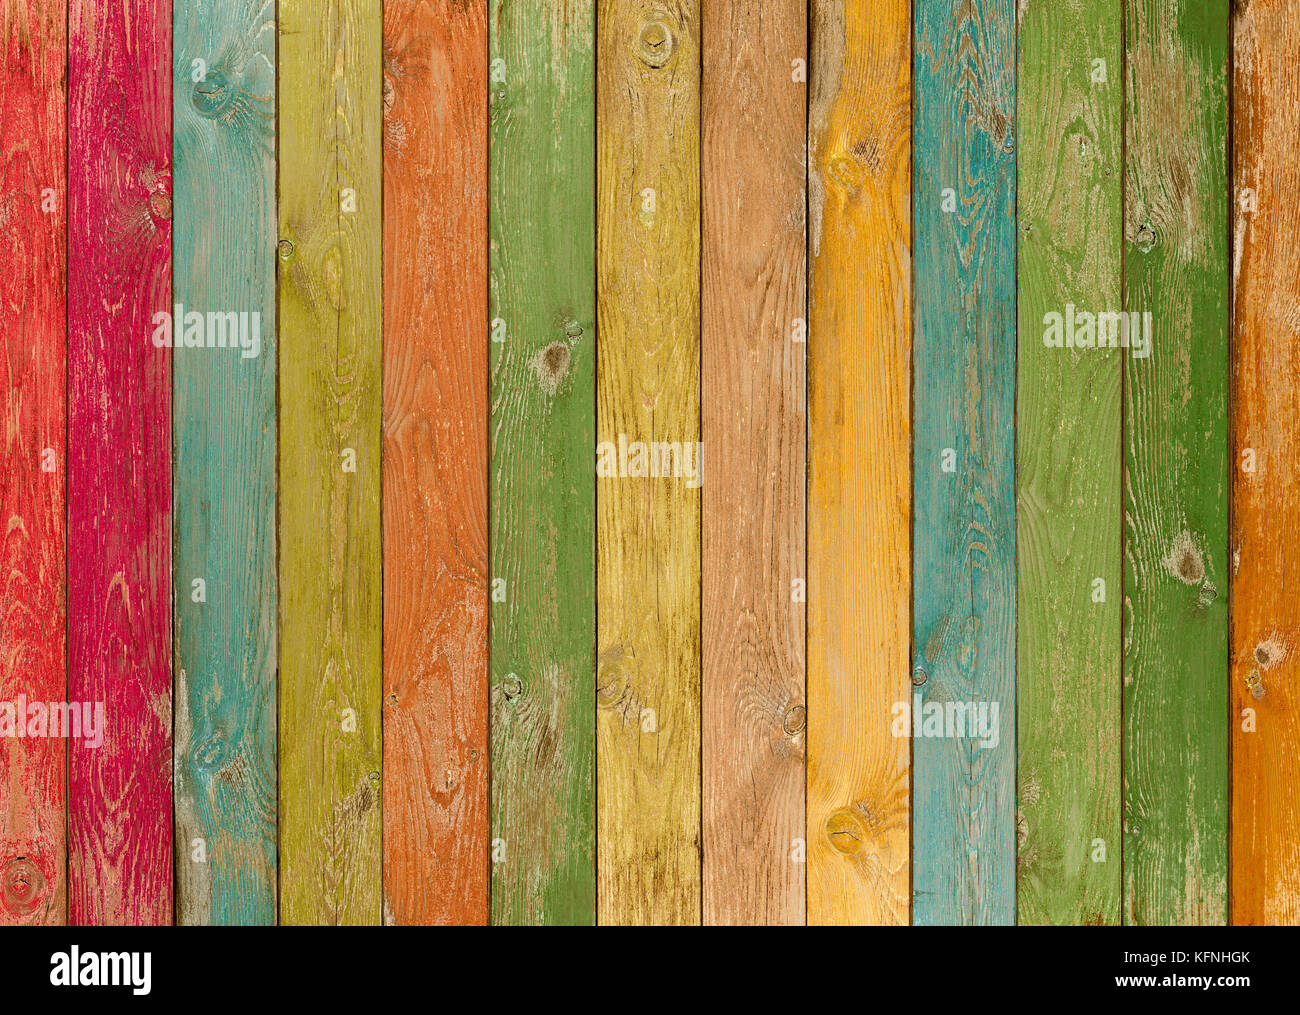 Vivid colorful wood planks texture or background Stock Photo